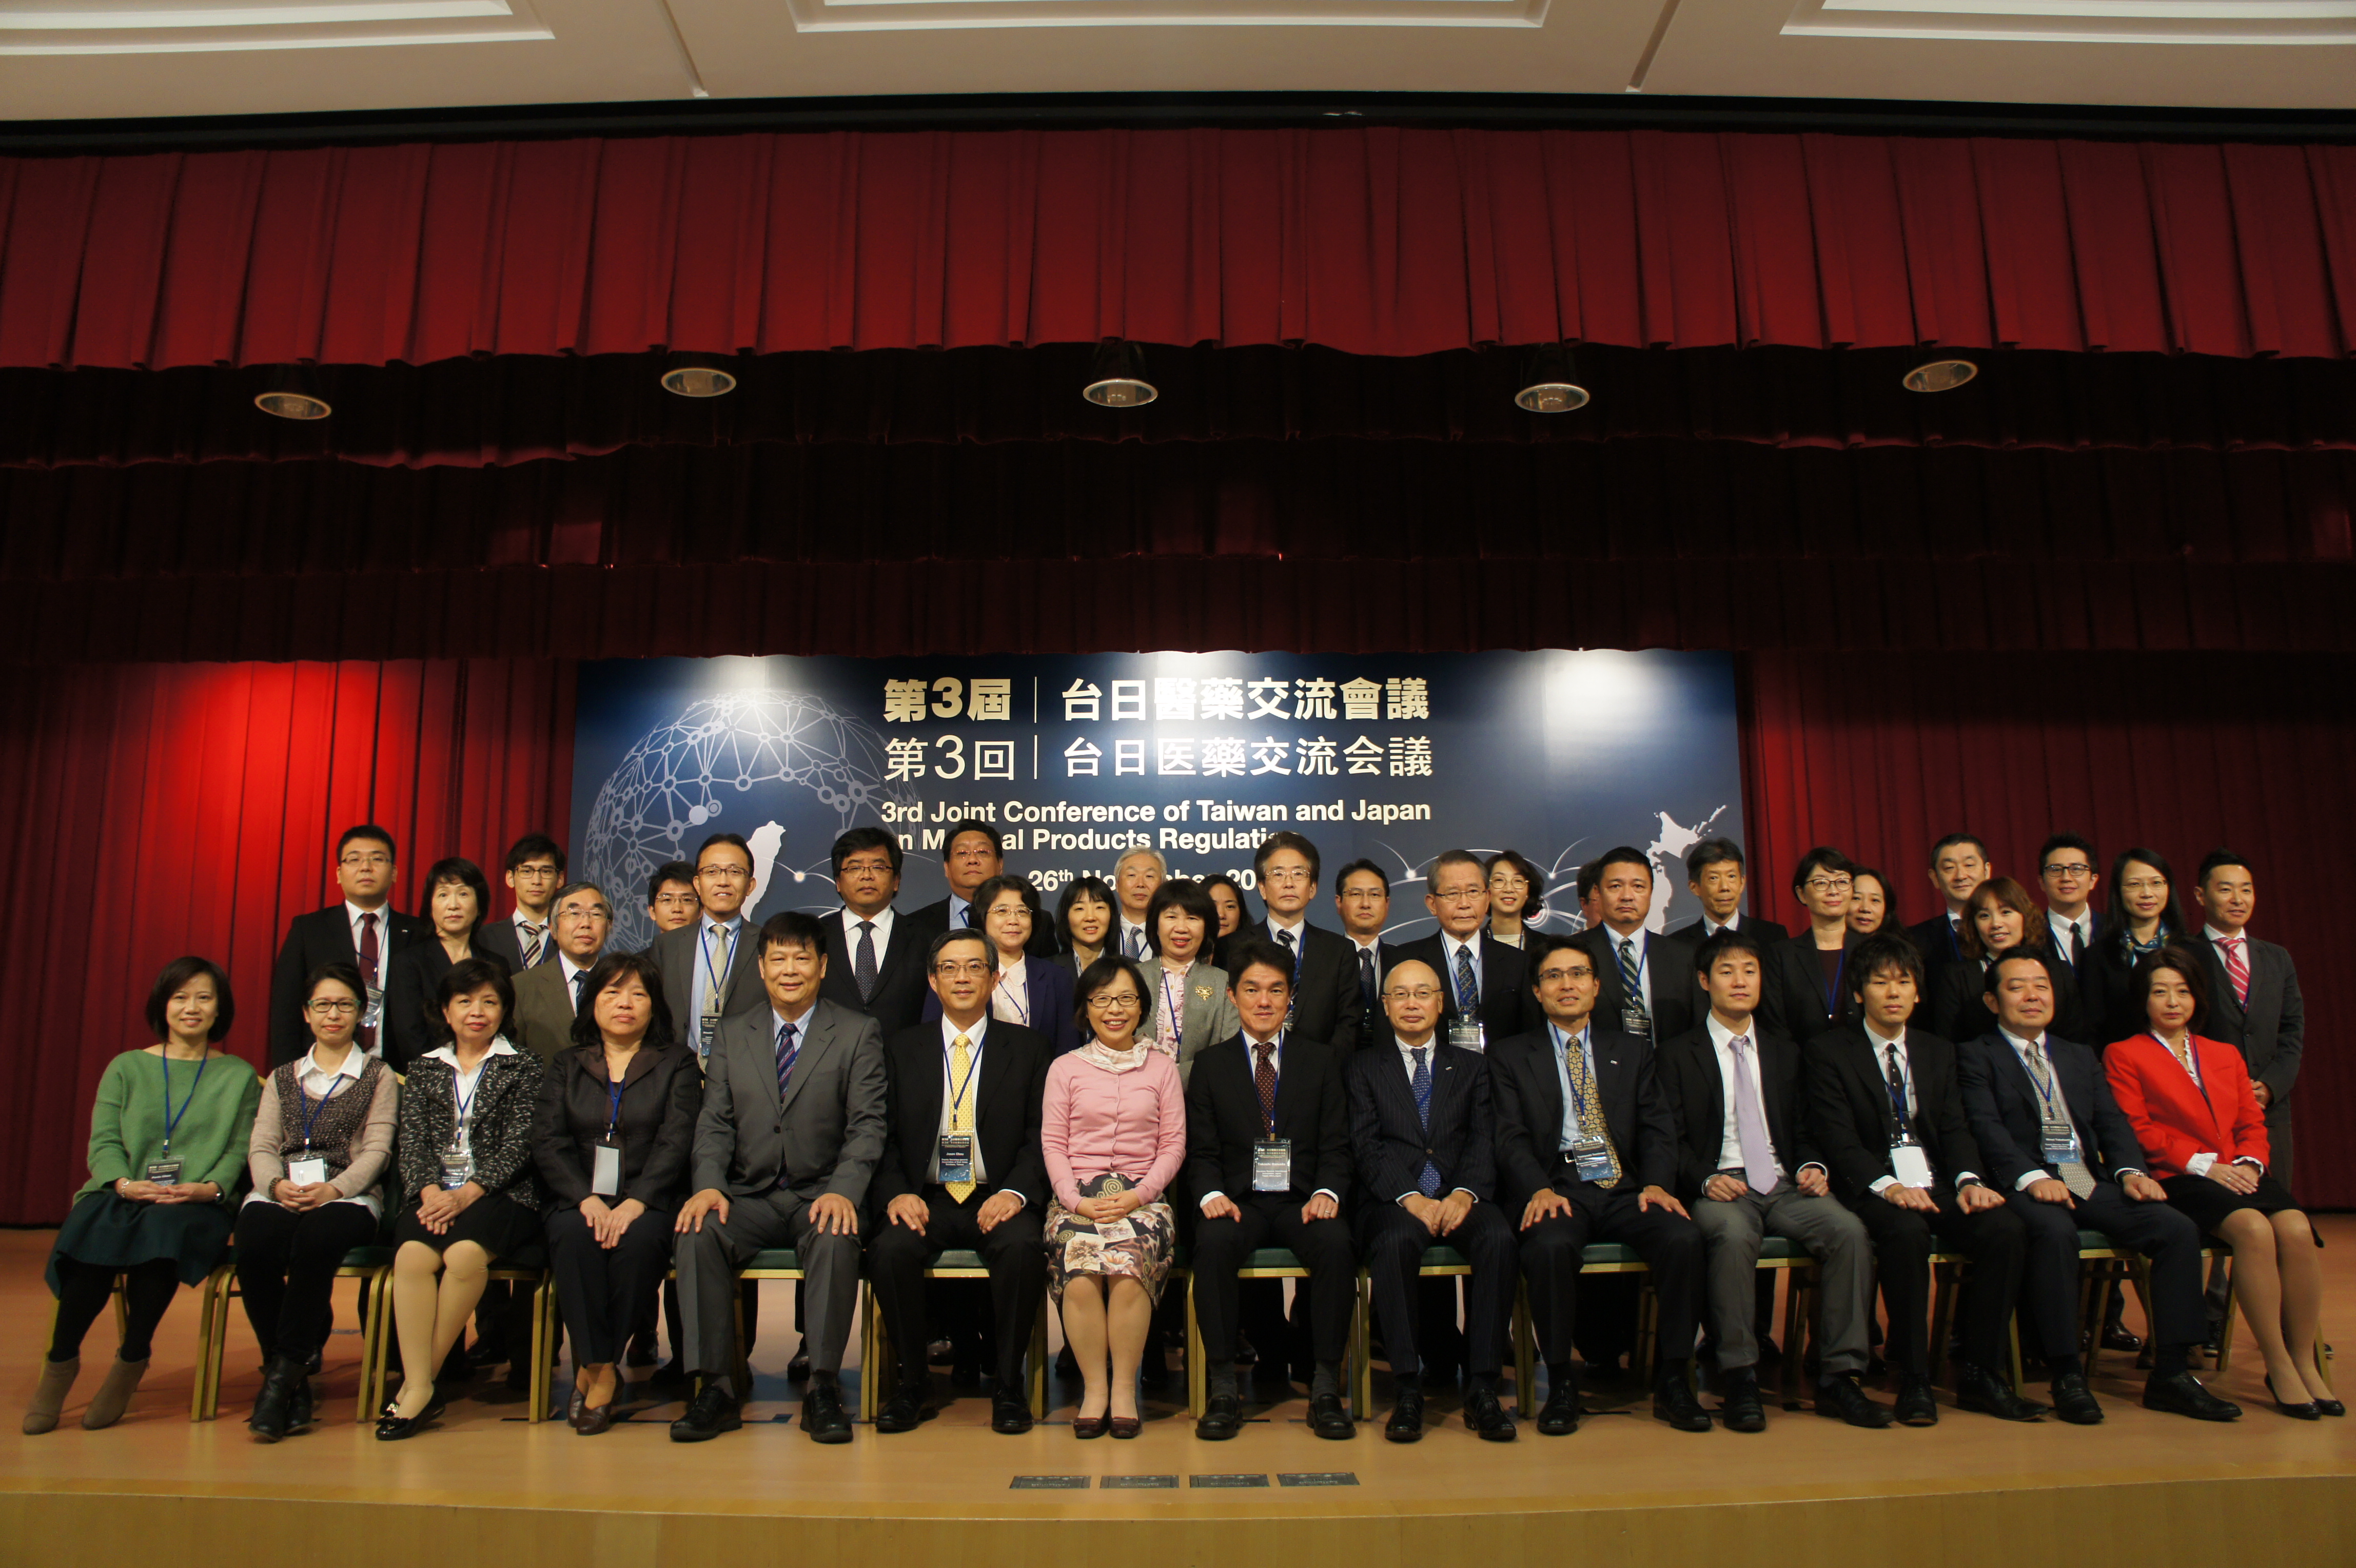 3rd Joint Conference of Taiwan and Japan on Medical Products Regulation